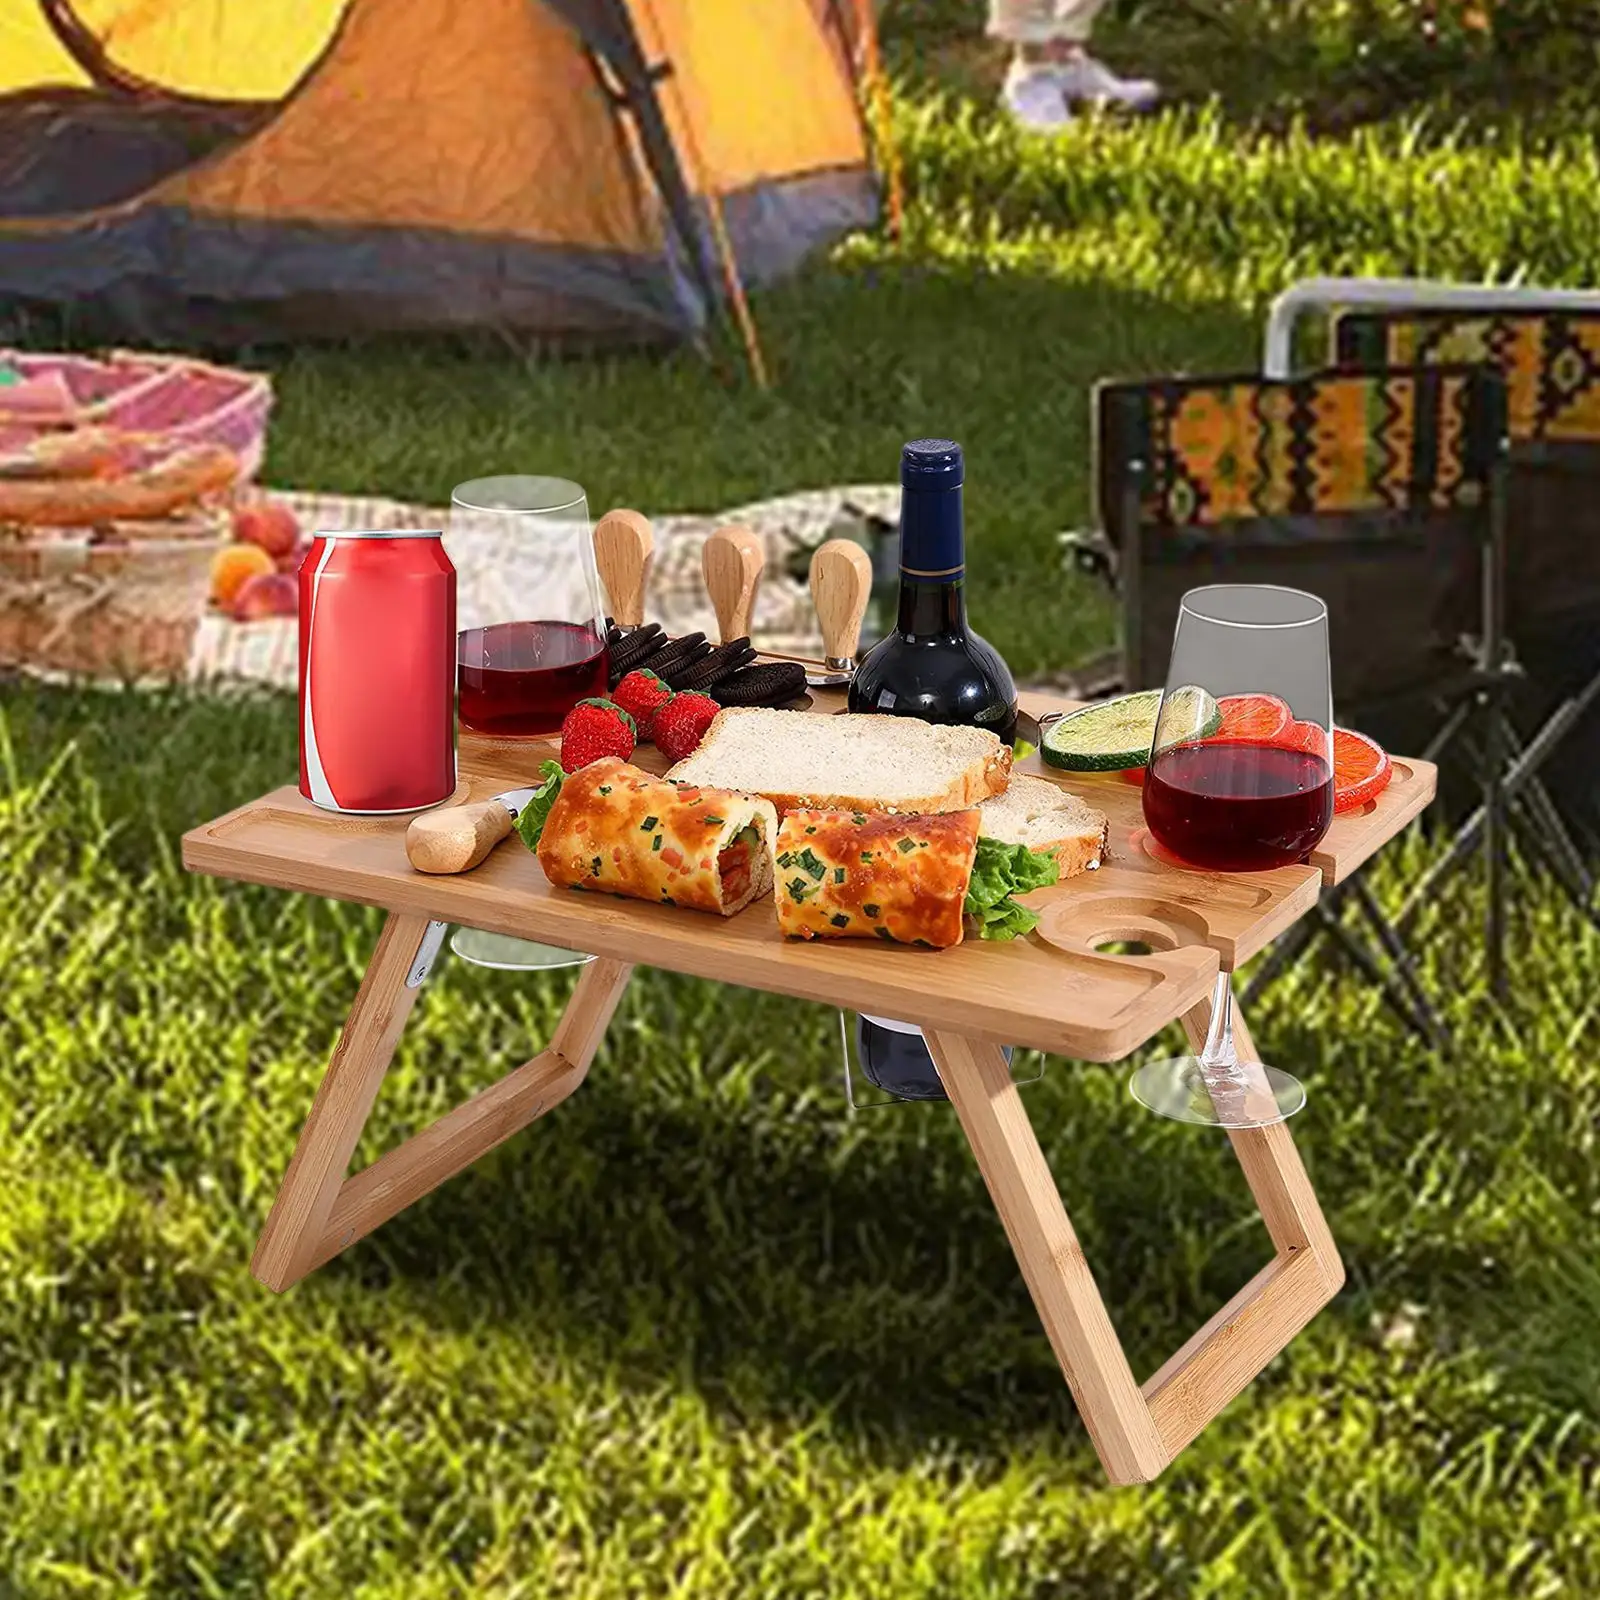 Folding Picnic Table Portable 2-in-1 Wine Table Wine Rack Holder Wine Glass Rack for Garden Party Camping Beach Outdoor Travel